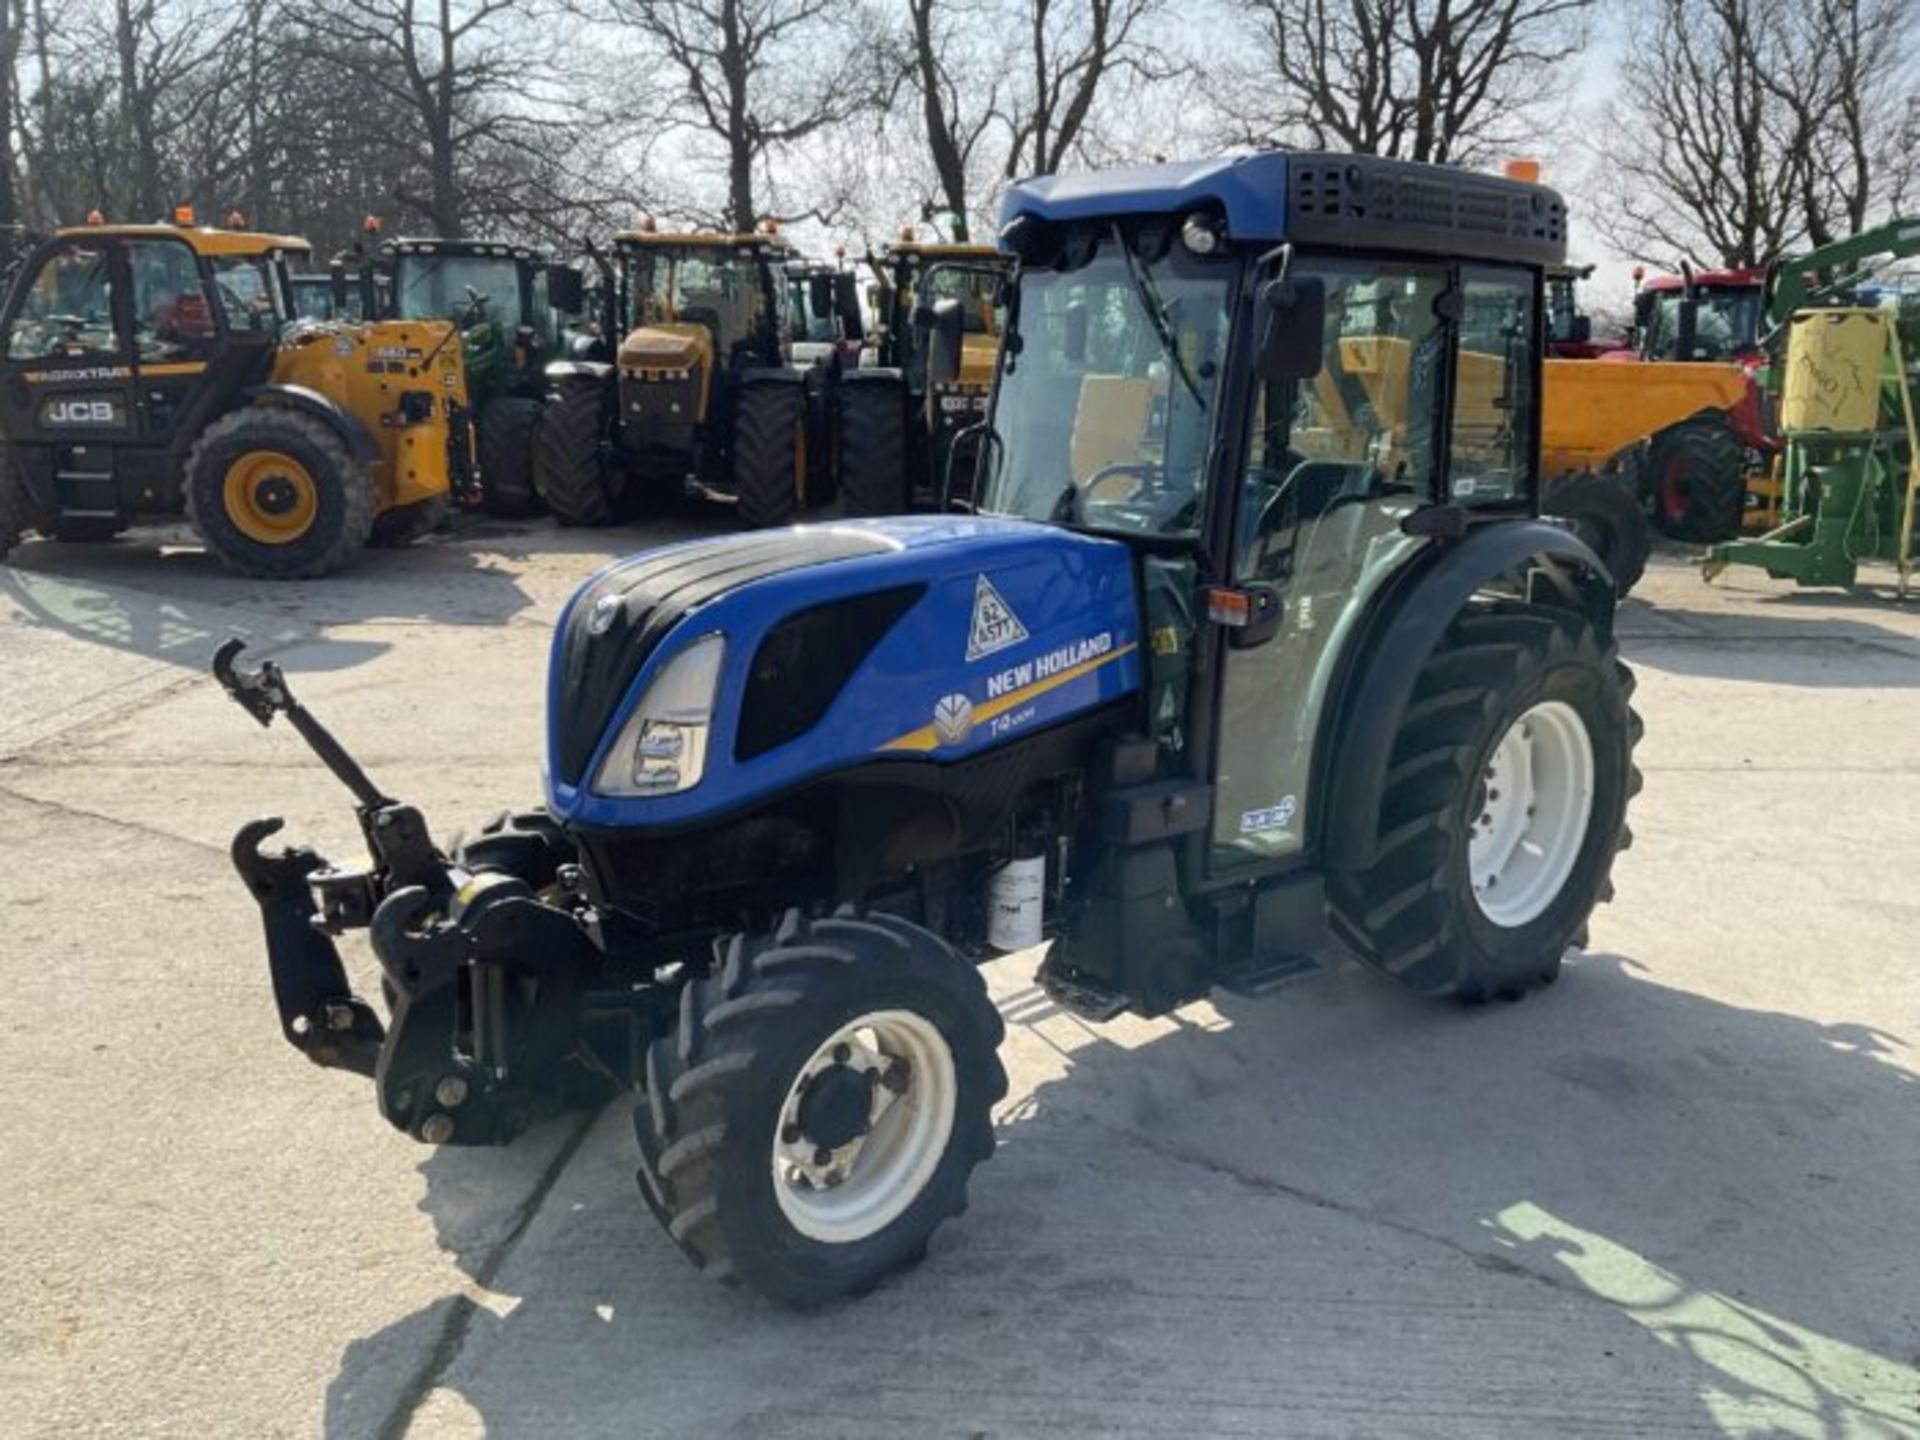 YEAR 2018 NEW HOLLAND T4.100N. FRONT LINKAGE. FRONT P.T.O. SUPER STEER. 3 SPOOLS. AIR CON - Image 2 of 11